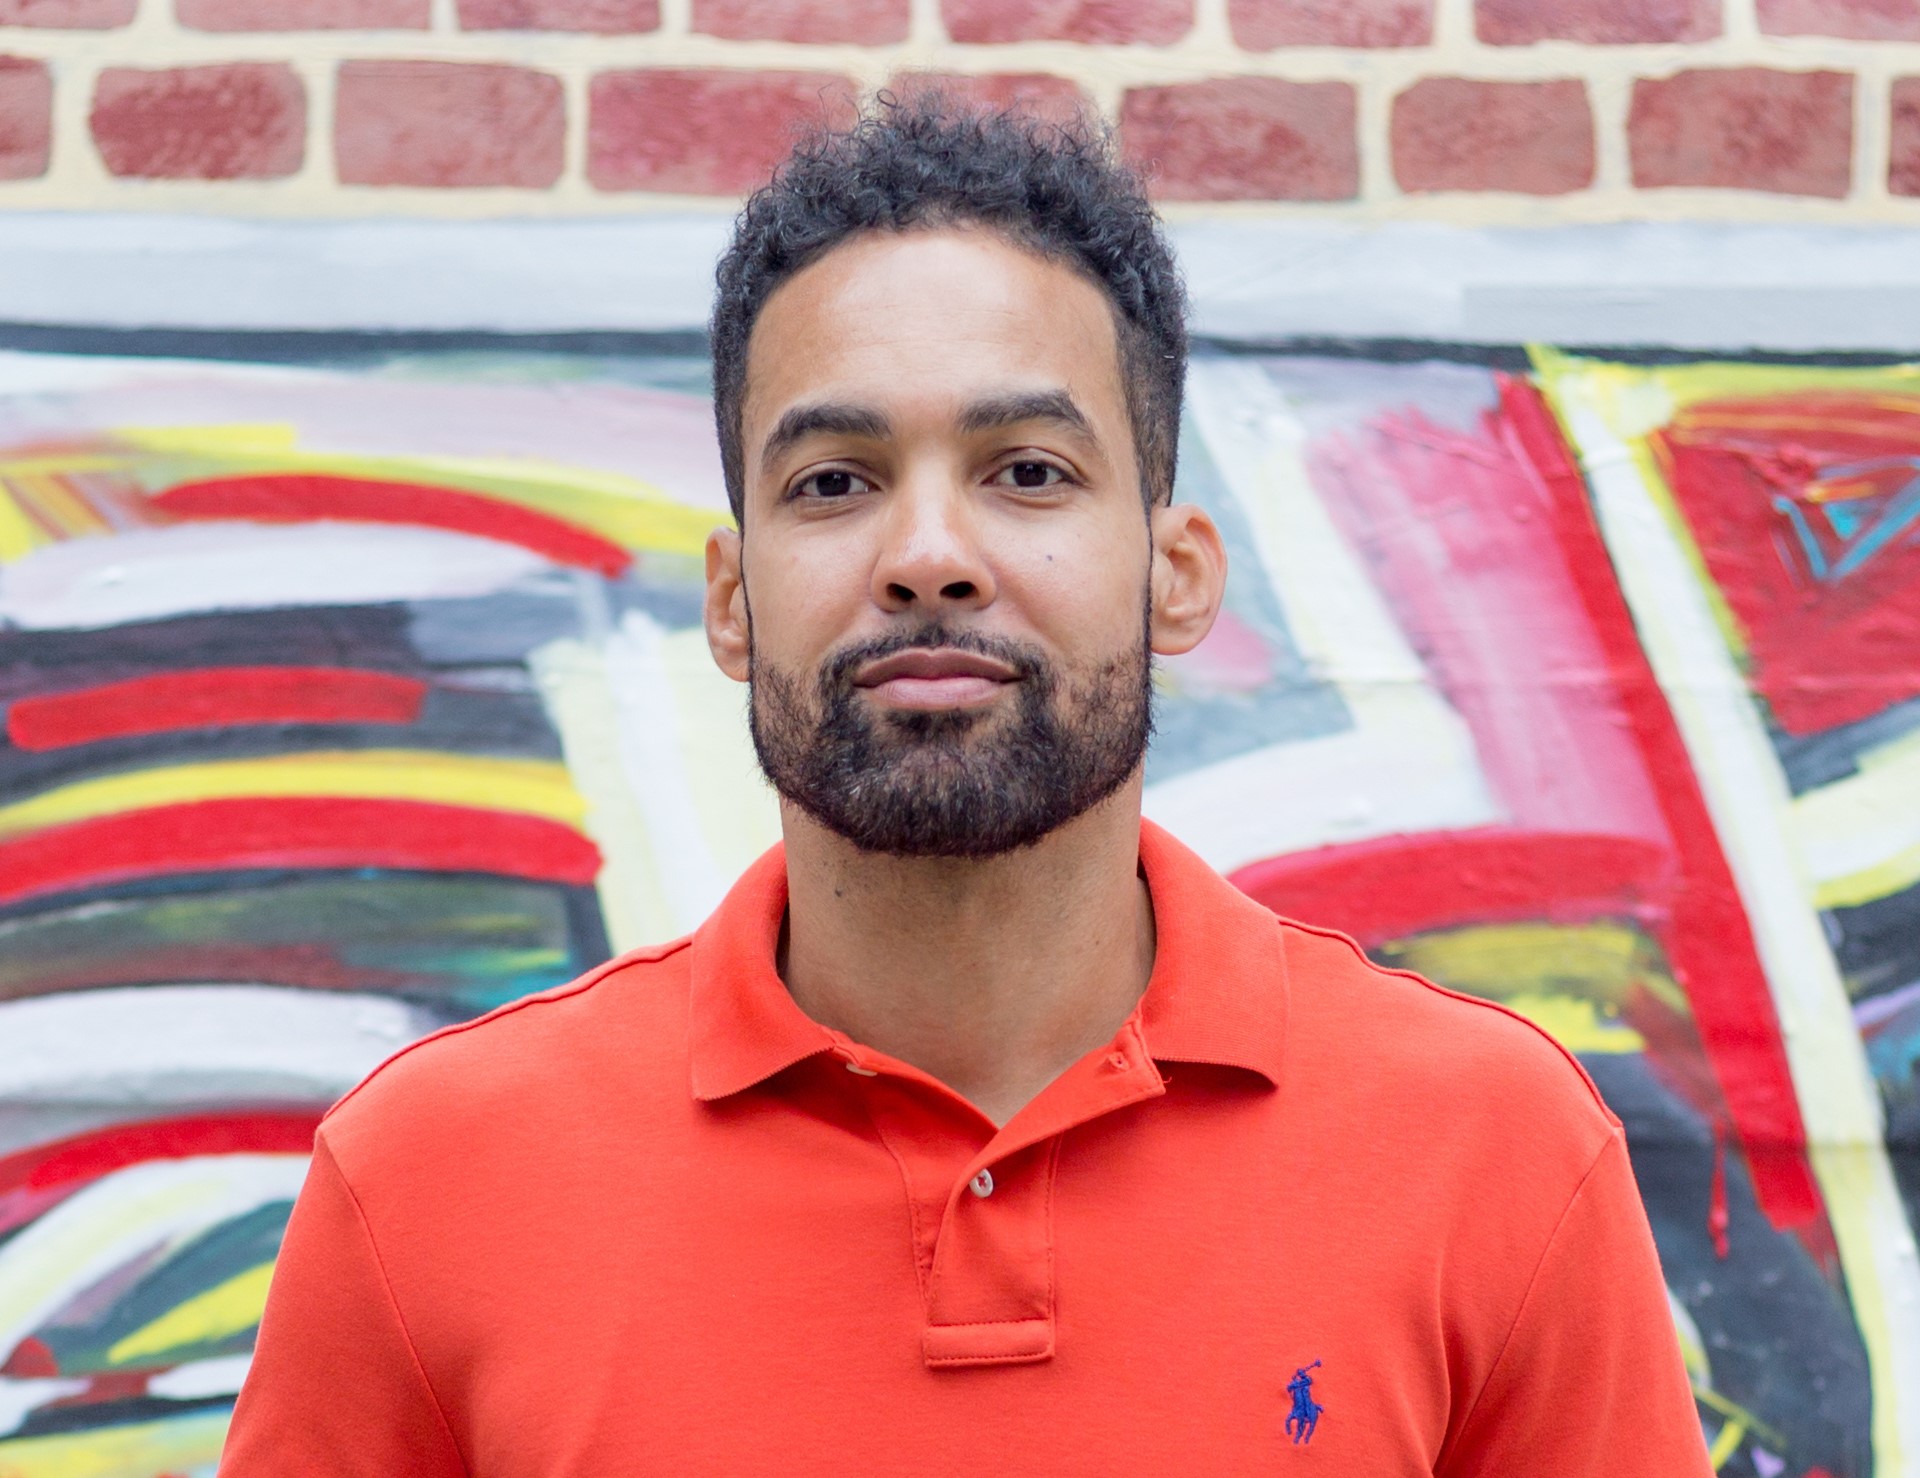 Jasiri X in a polo shirt smiling in front of a brightly painted brick wall.